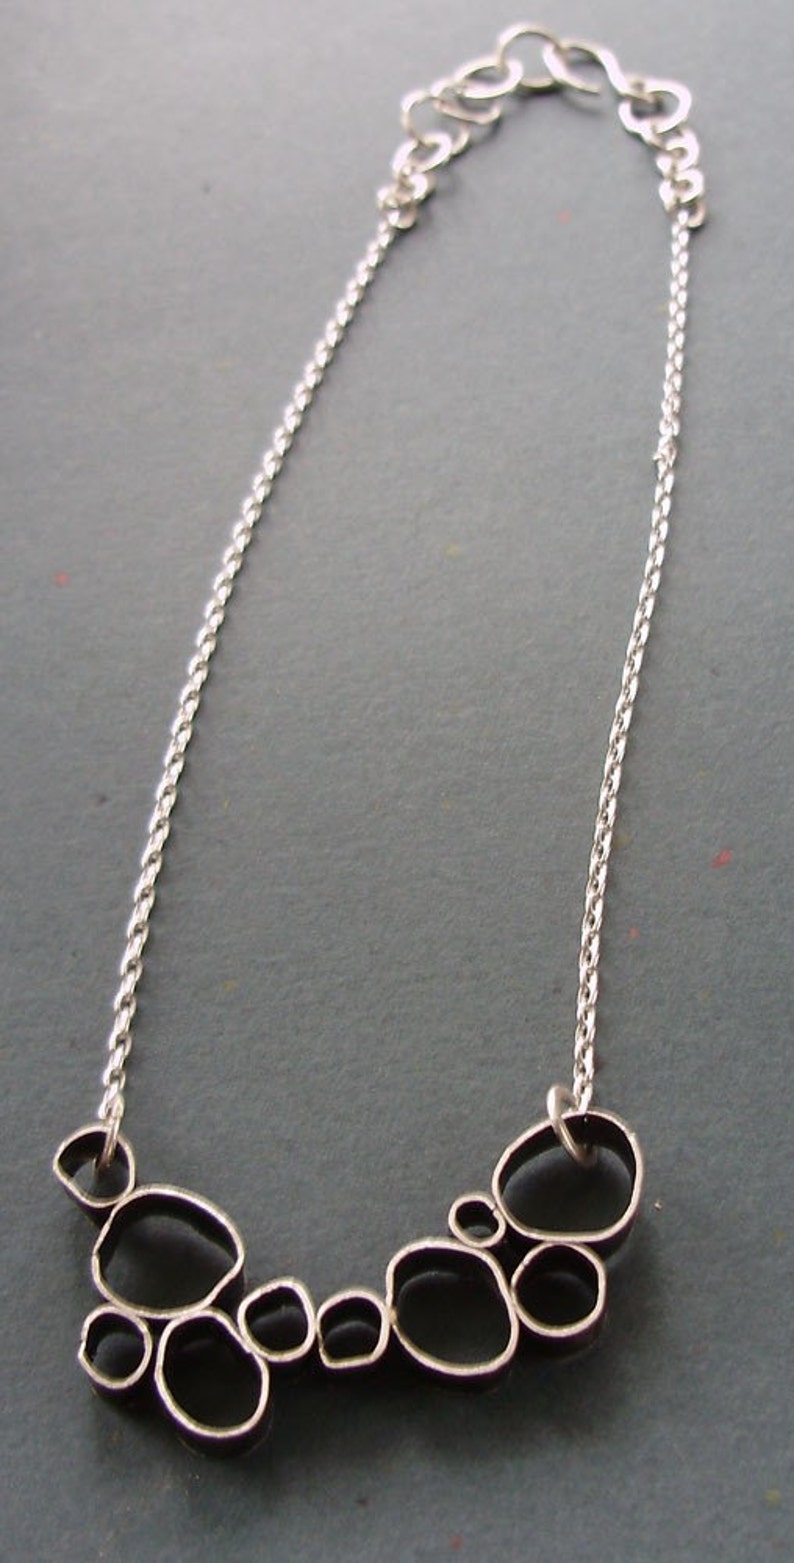 Organic Loops Pendant, Silver Ovals, Funky Circles, Edgy, Modern Necklace, Artisan Metalwork image 4